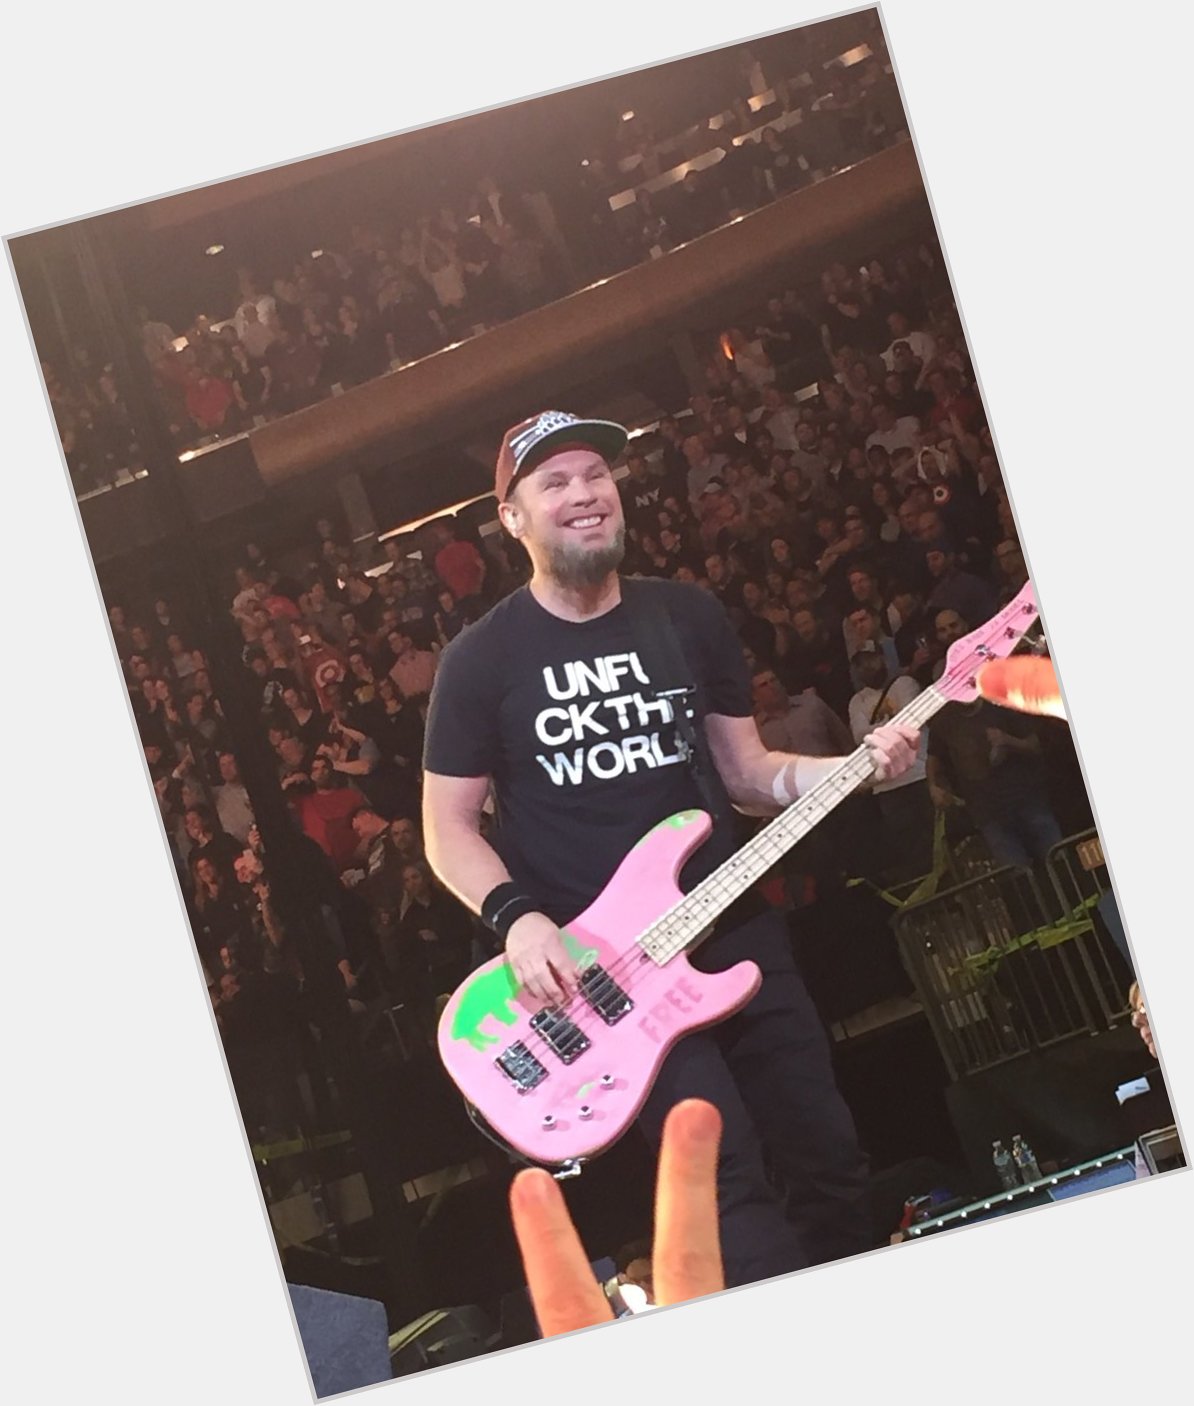 Related: happy birthday to Jeff Ament! Snapped this pic at 2016 MSG N1  